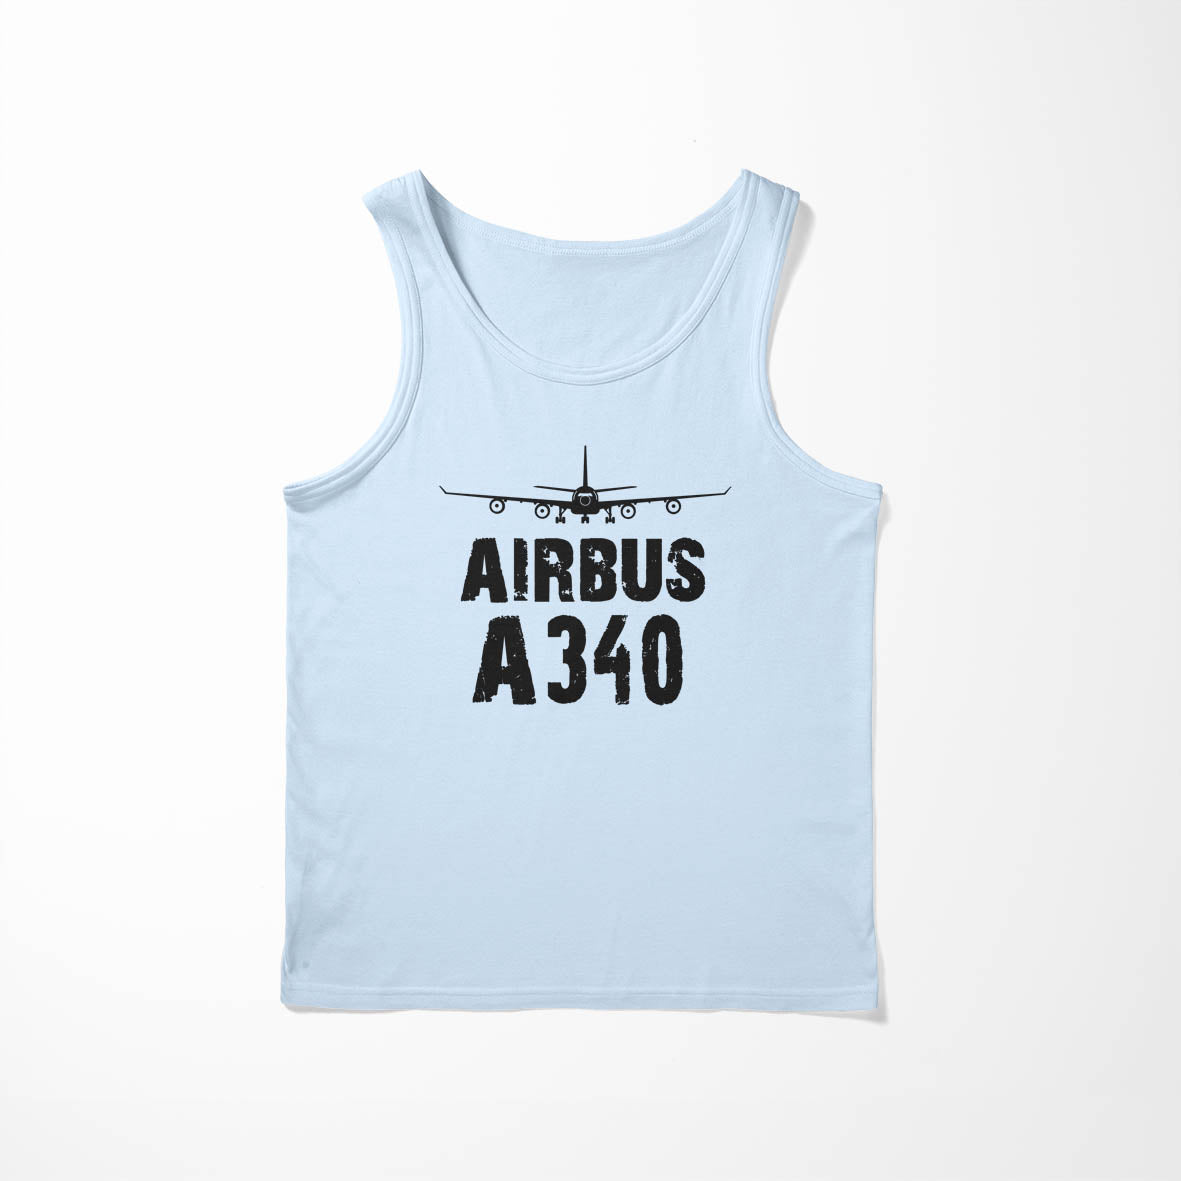 Airbus A340 & Plane Designed Tank Tops